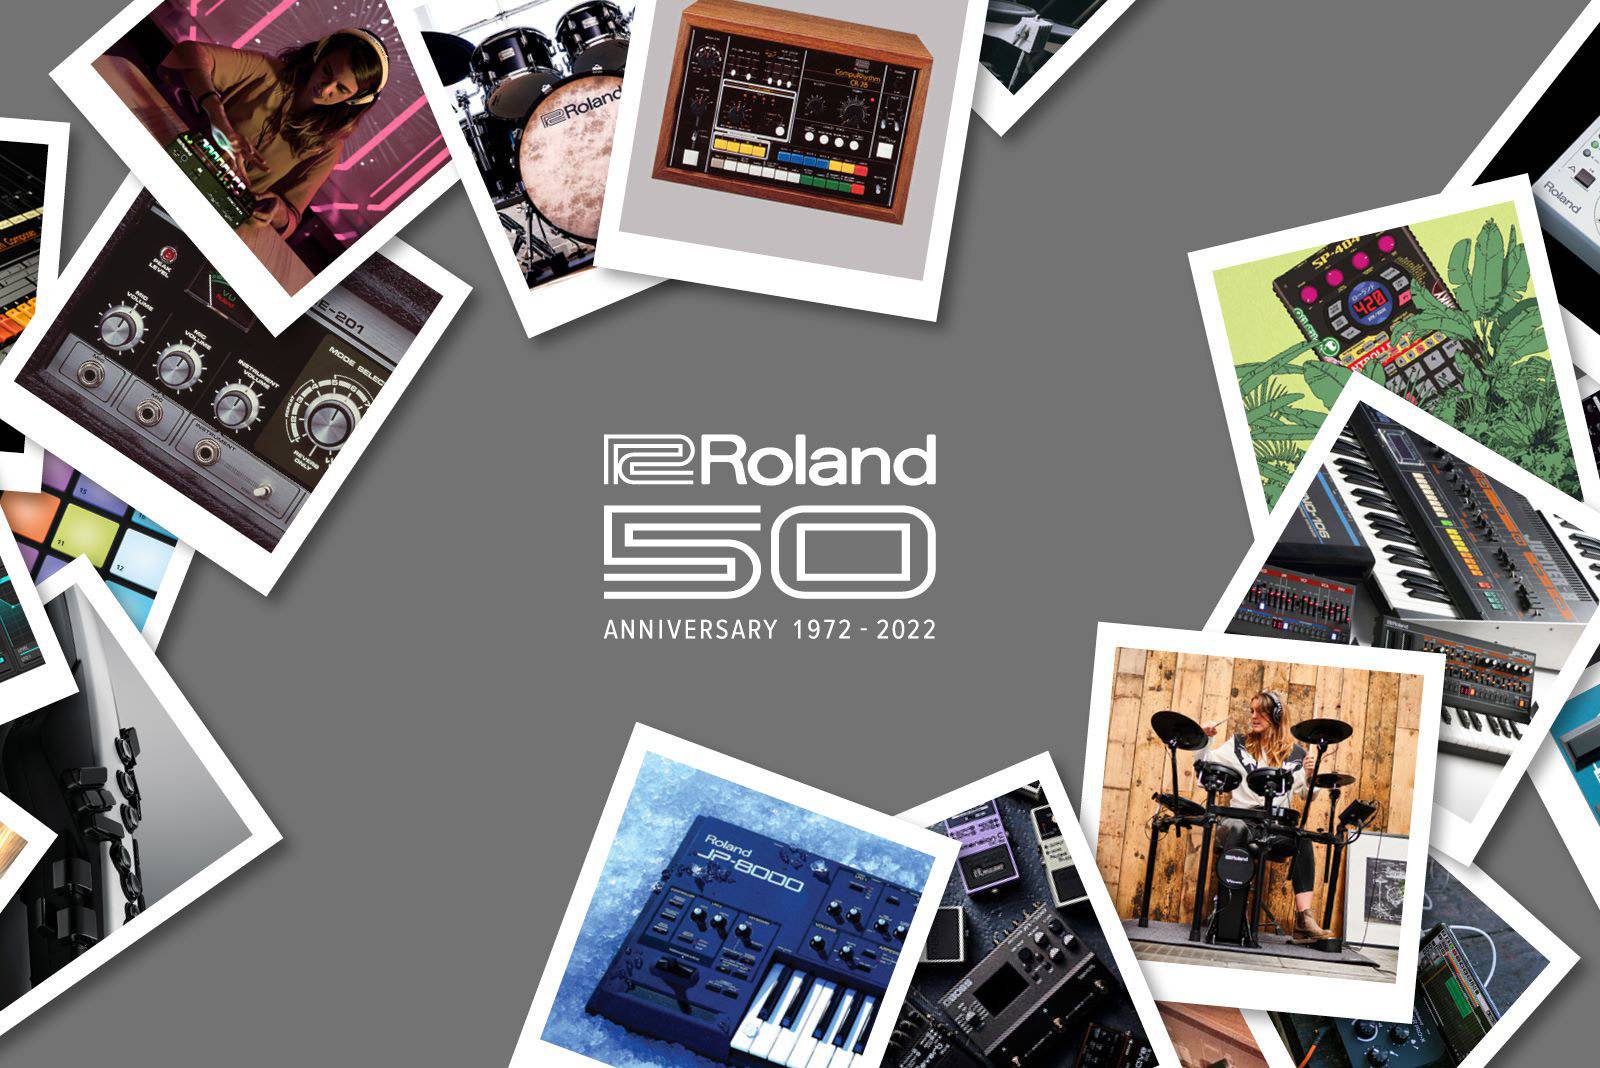 Roland is celebrating 50 years of creating incredible electronic instruments